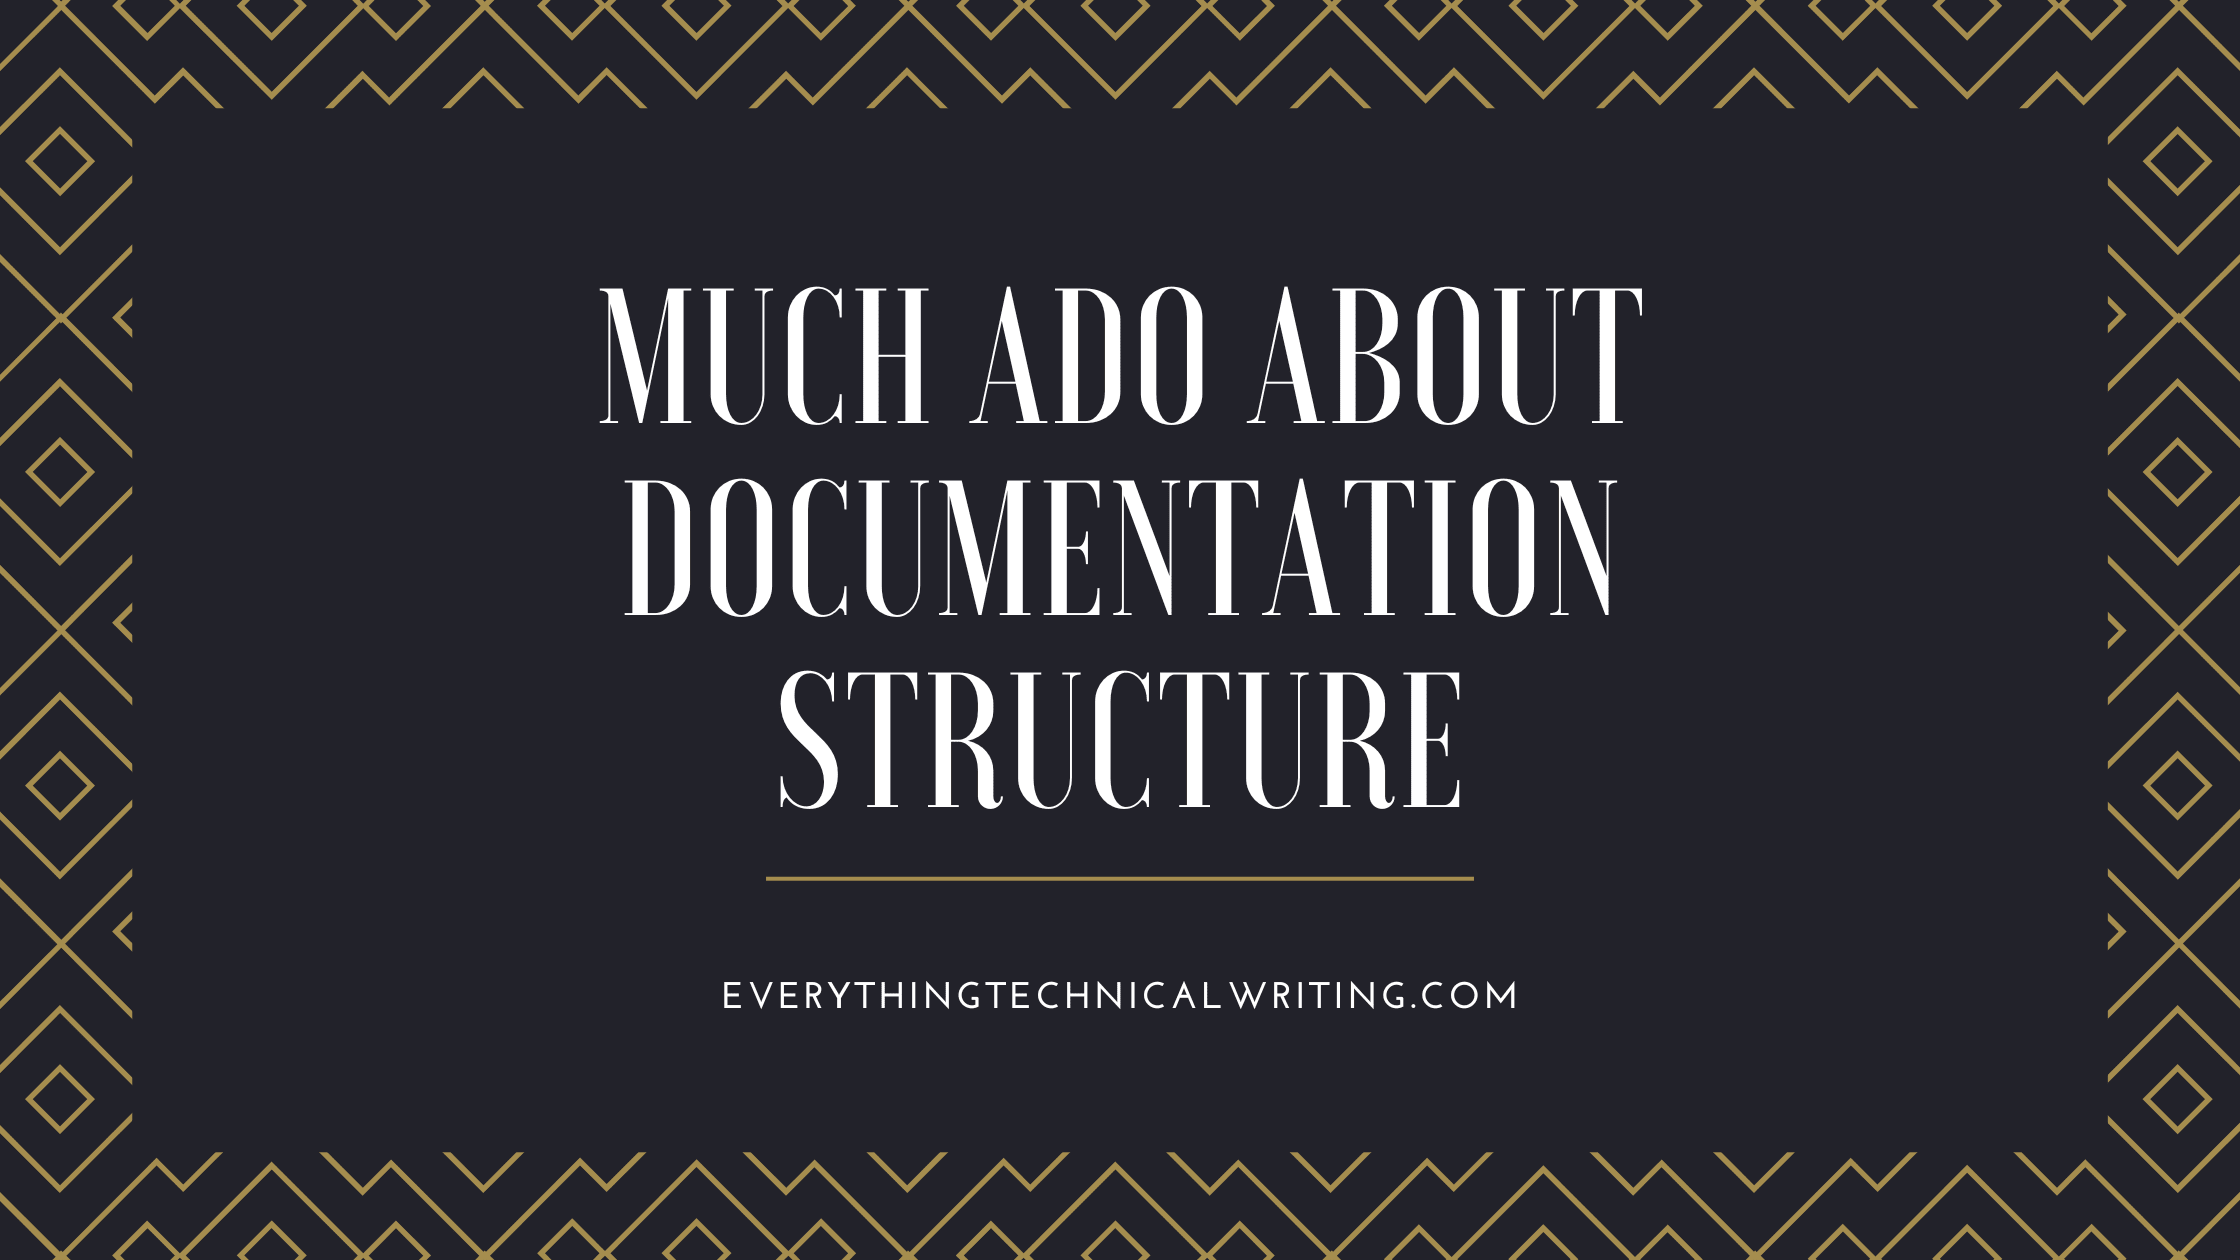 Much Ado about Documentation Structure